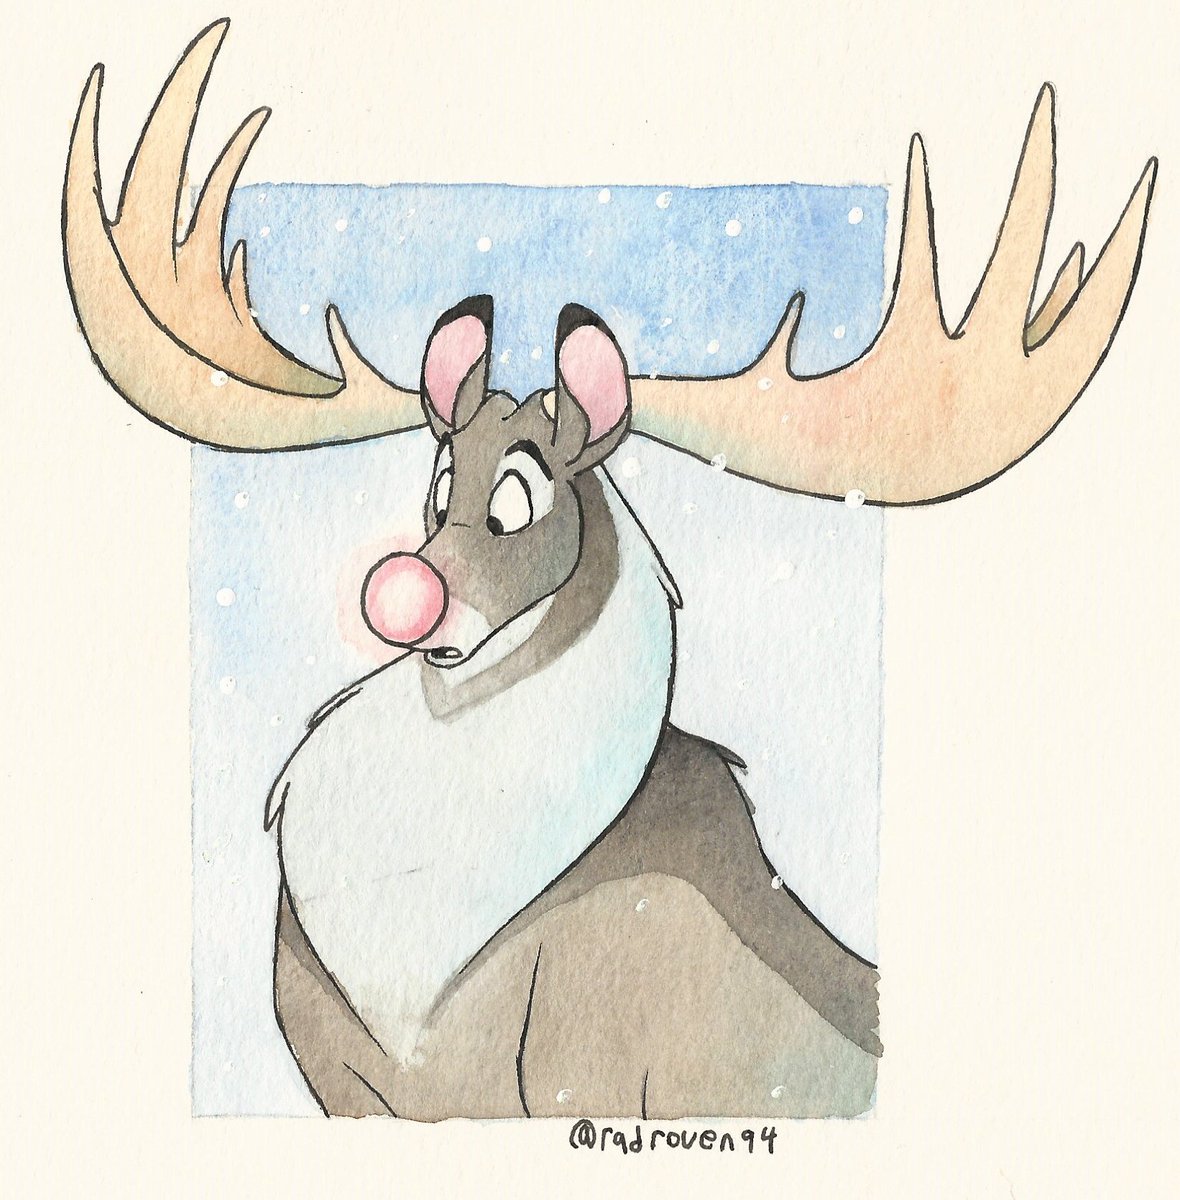 🎶Rudolph the Red-Nosed.... Megaloceros?.... Something tells me this guy doesn't want to join in any Reindeer Games.

Made with ink, watercolor, and just a little bit of acrylic.

#mixedmedia #watercolor #holiday #christmas #prehistoricanimals #megaloceros